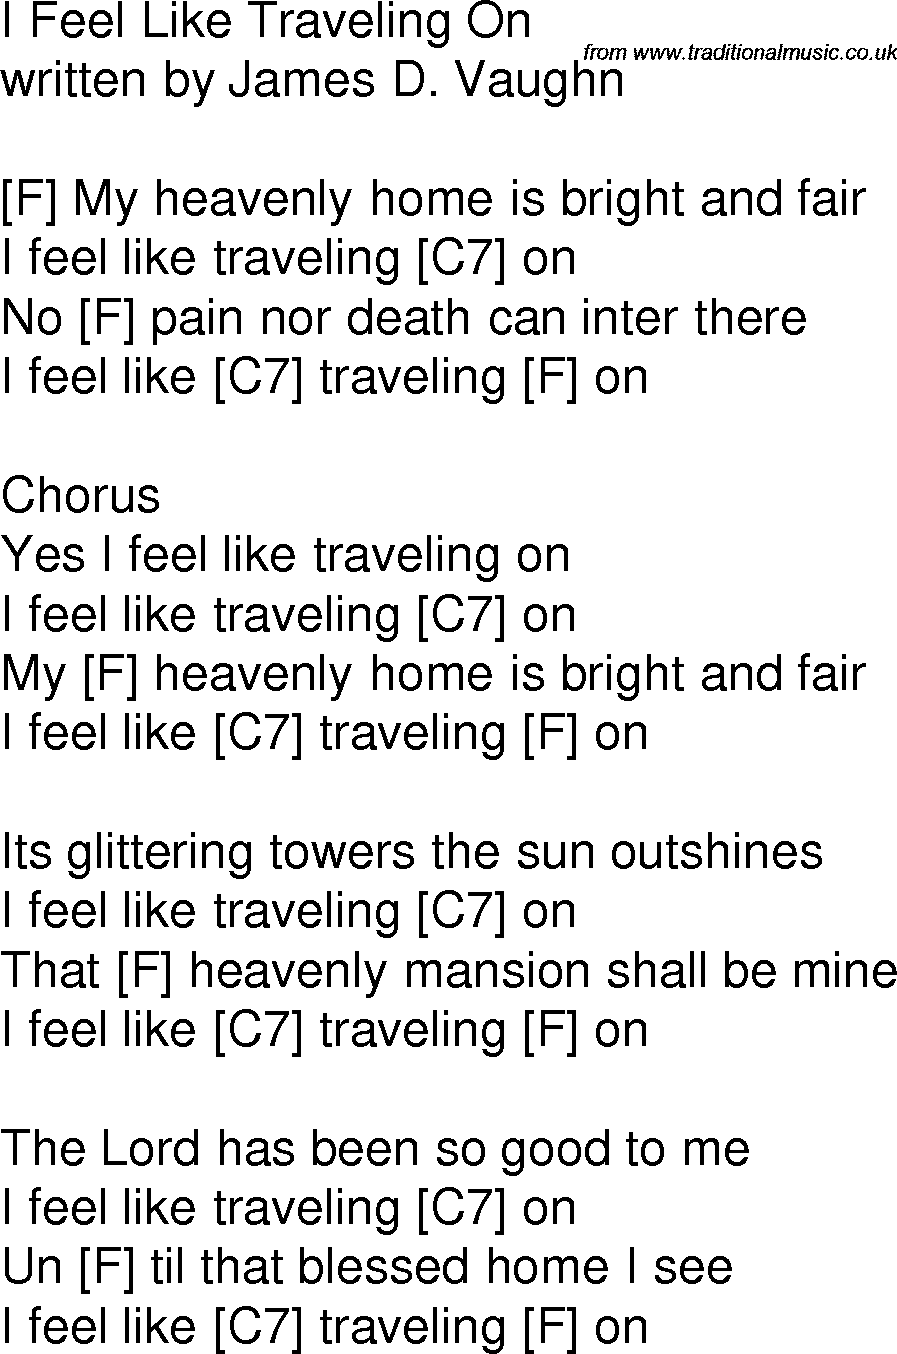 Old time song lyrics with chords for I Feel Like Traveling On F